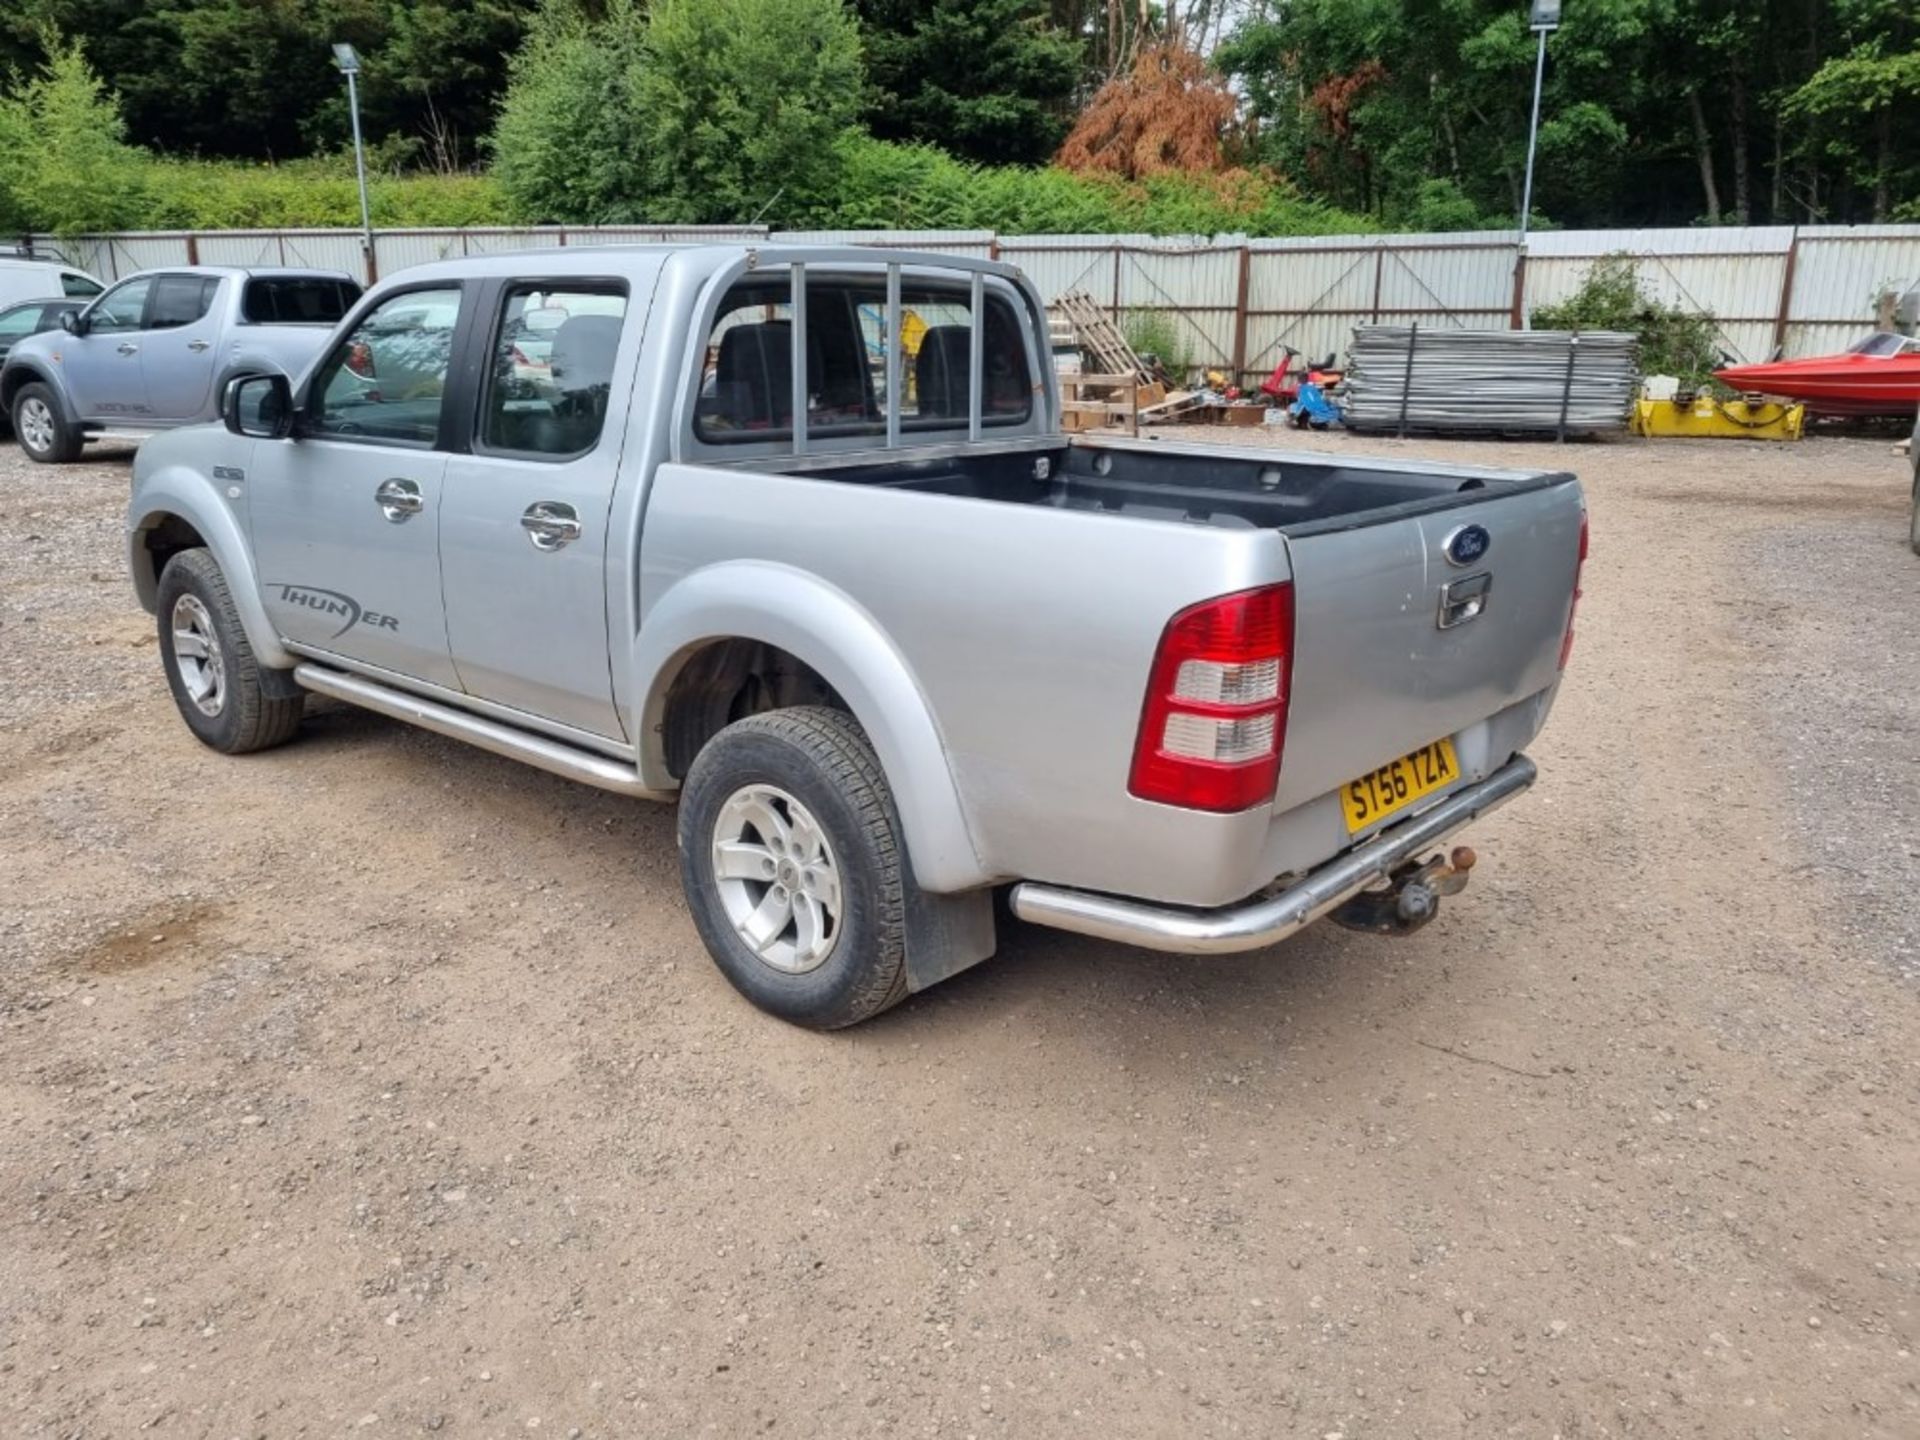 07/56 FORD RANGER THUNDER D/C 4WD - 2500cc 4dr 4x4 (Silver, 93k) - Image 5 of 9